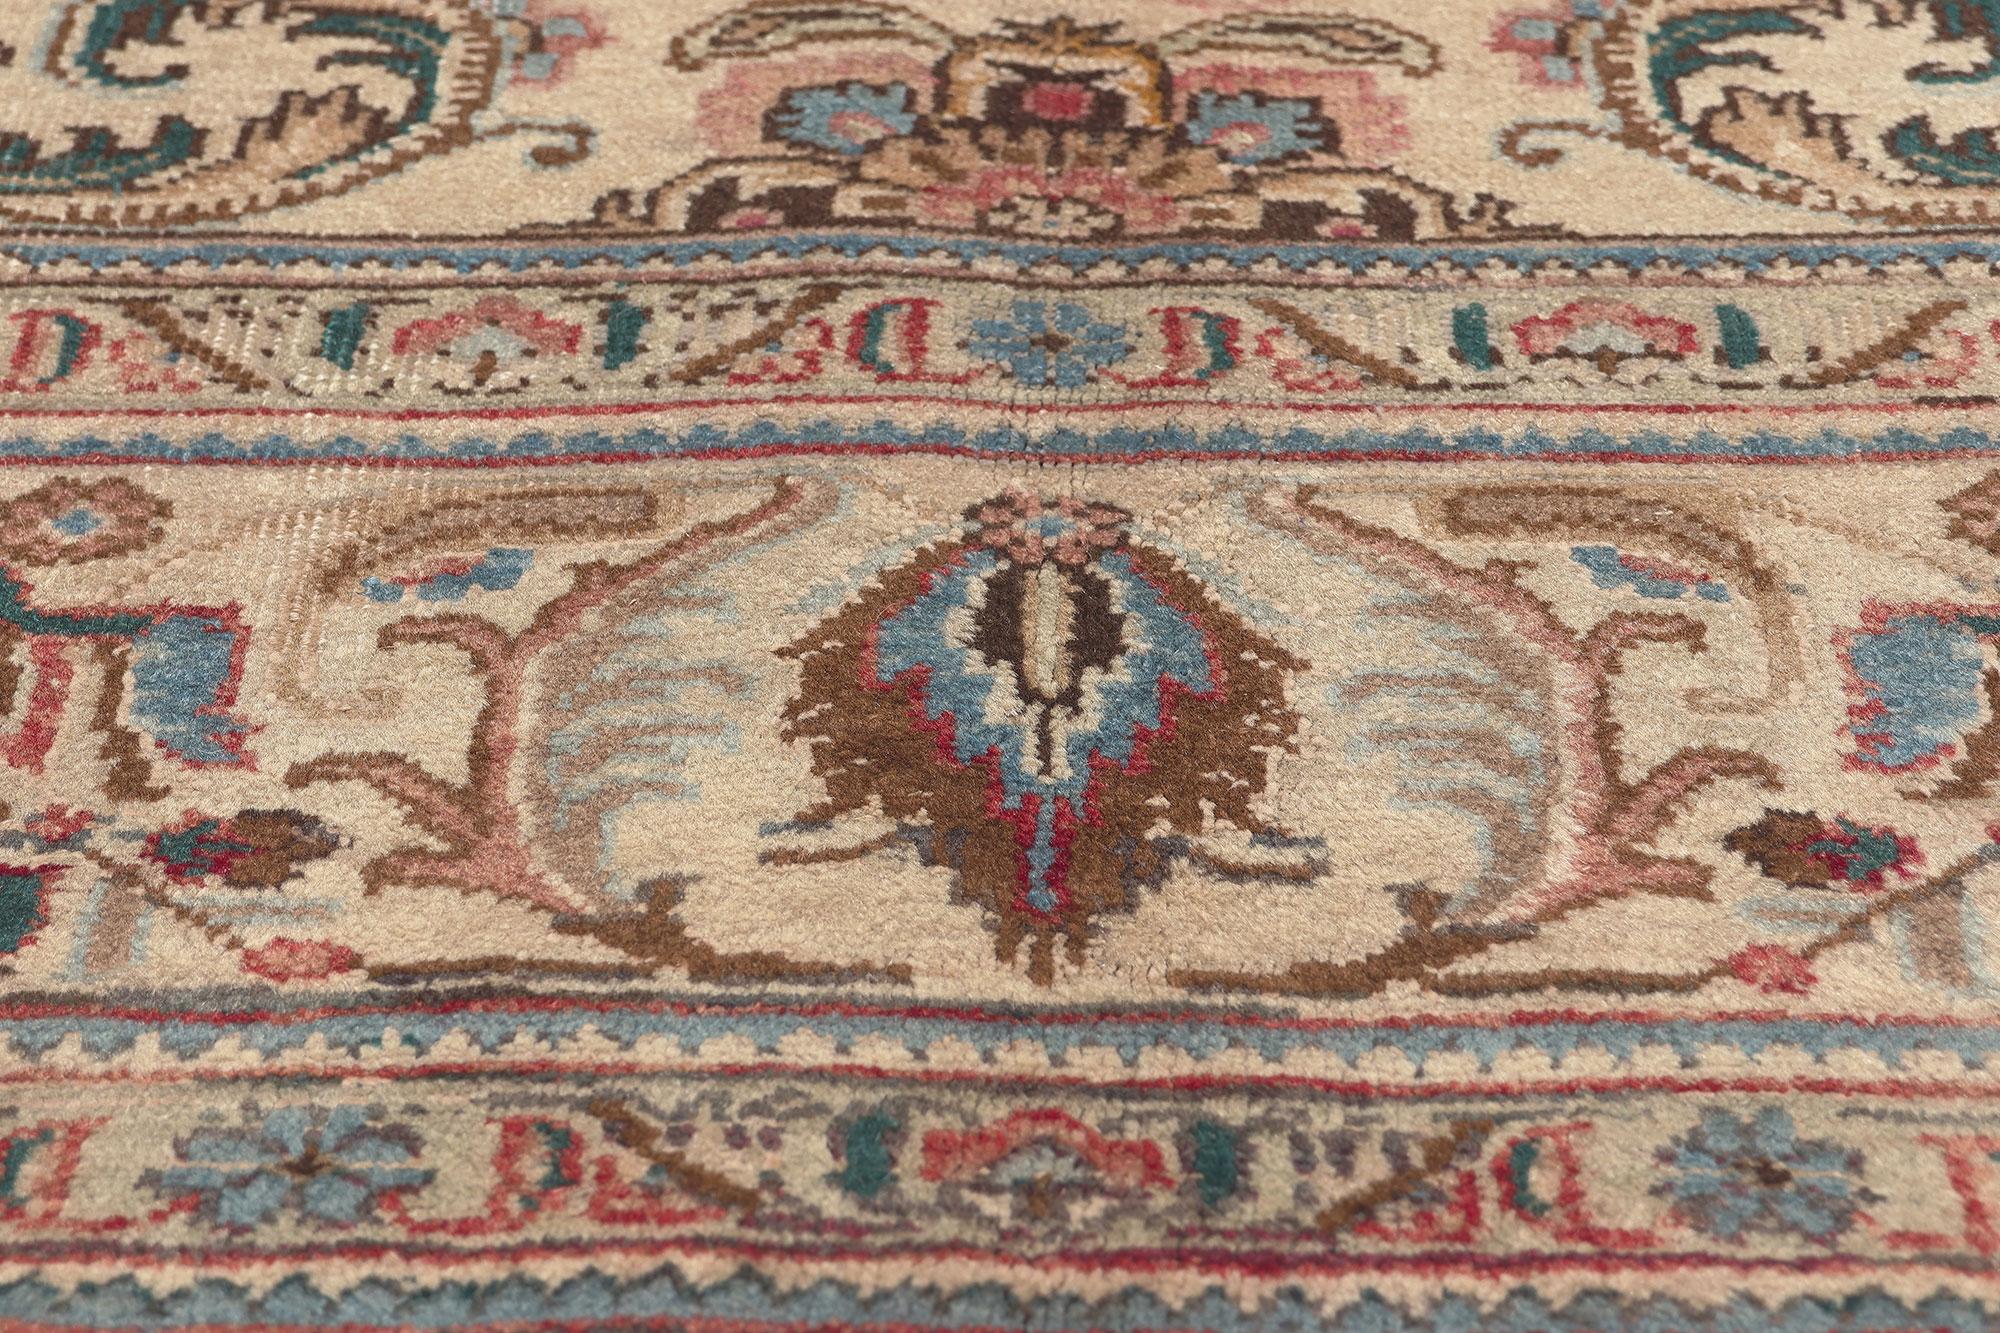 Vintage Persian Tabriz Rug, Low-Key Luxury Meets Belgian Style In Good Condition For Sale In Dallas, TX